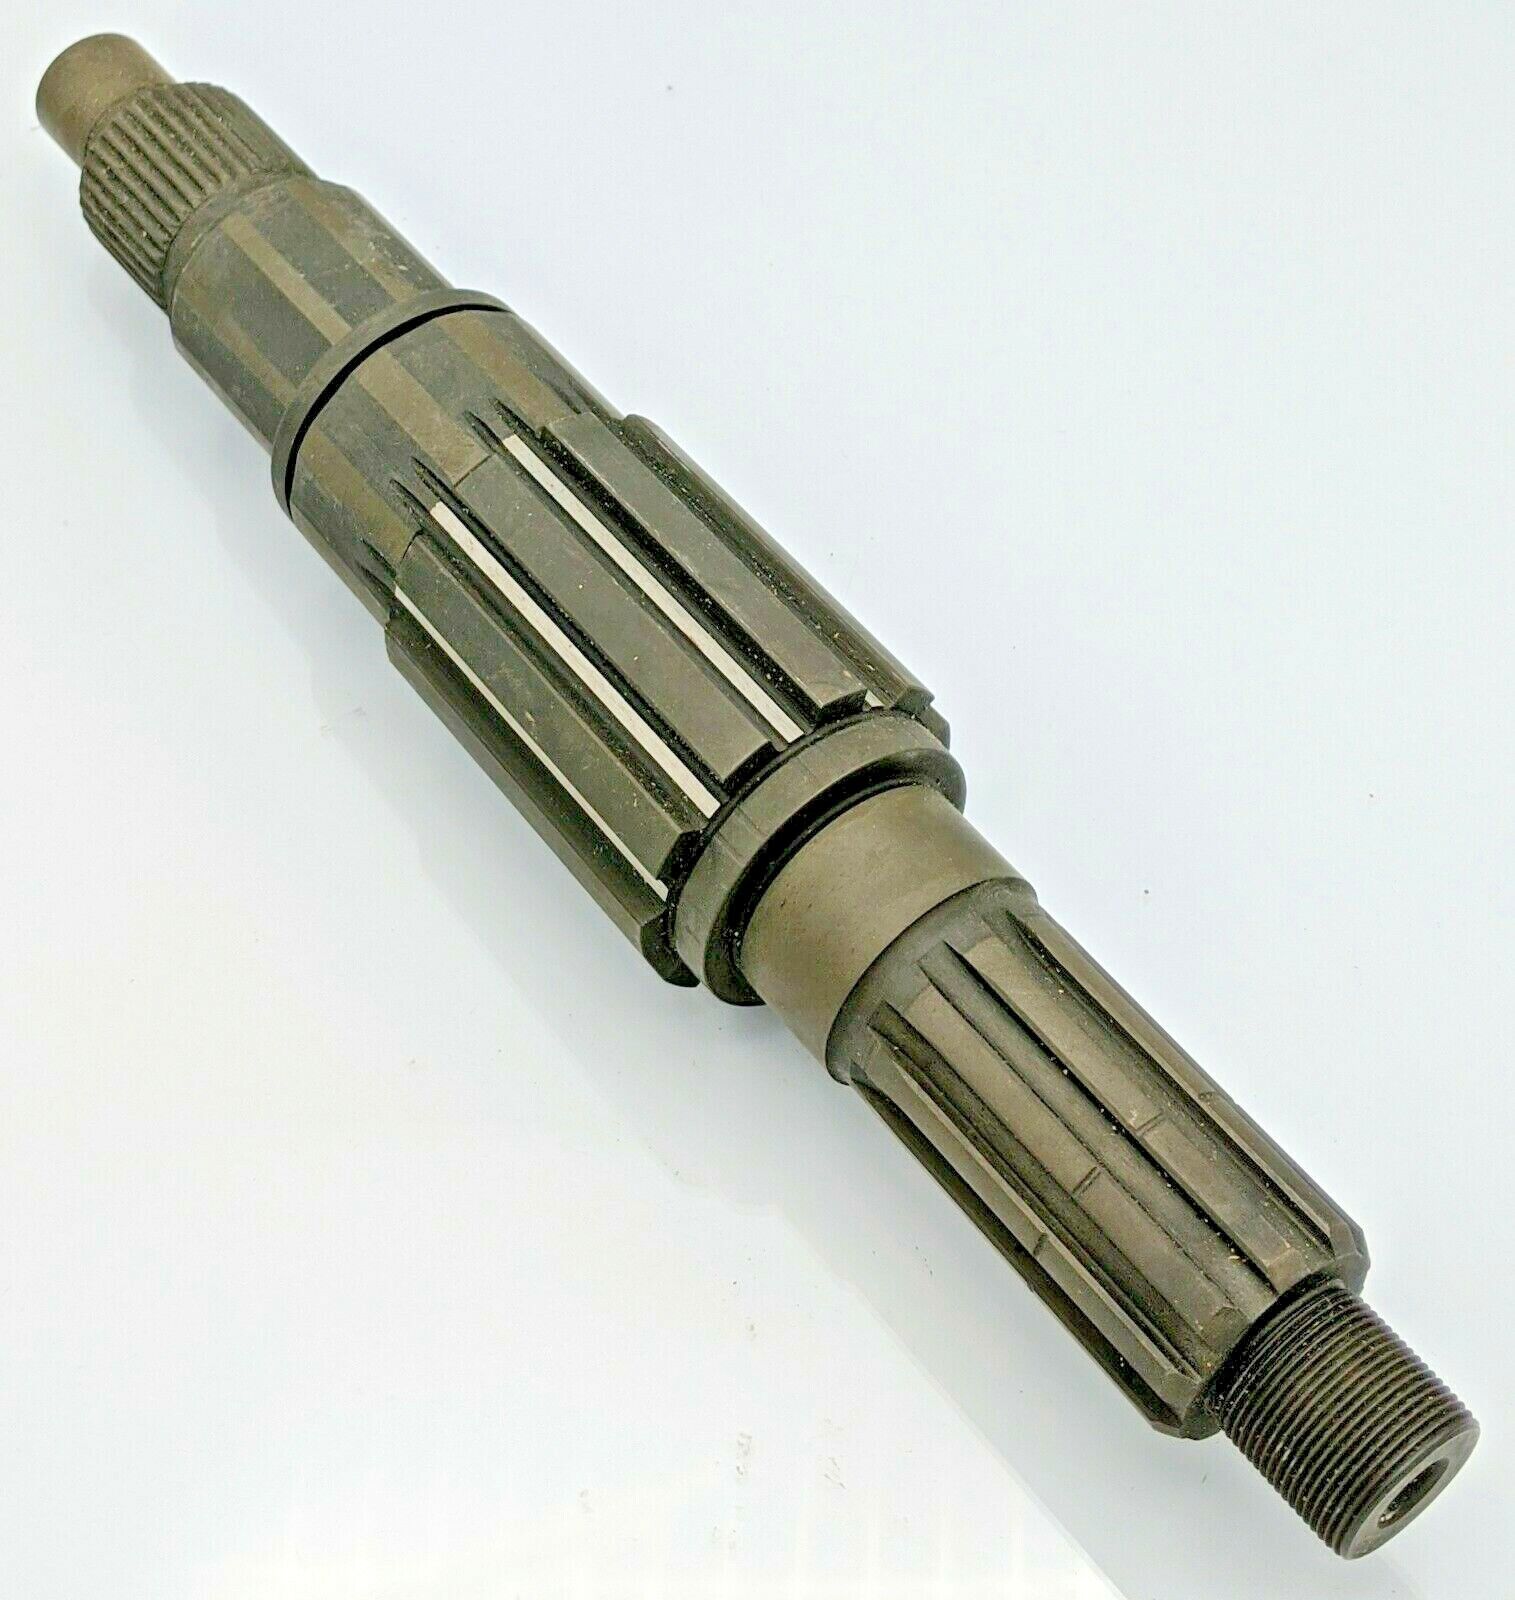 95991 Sale Special Price Sale New Process Shaft OEM SK-06200812TB